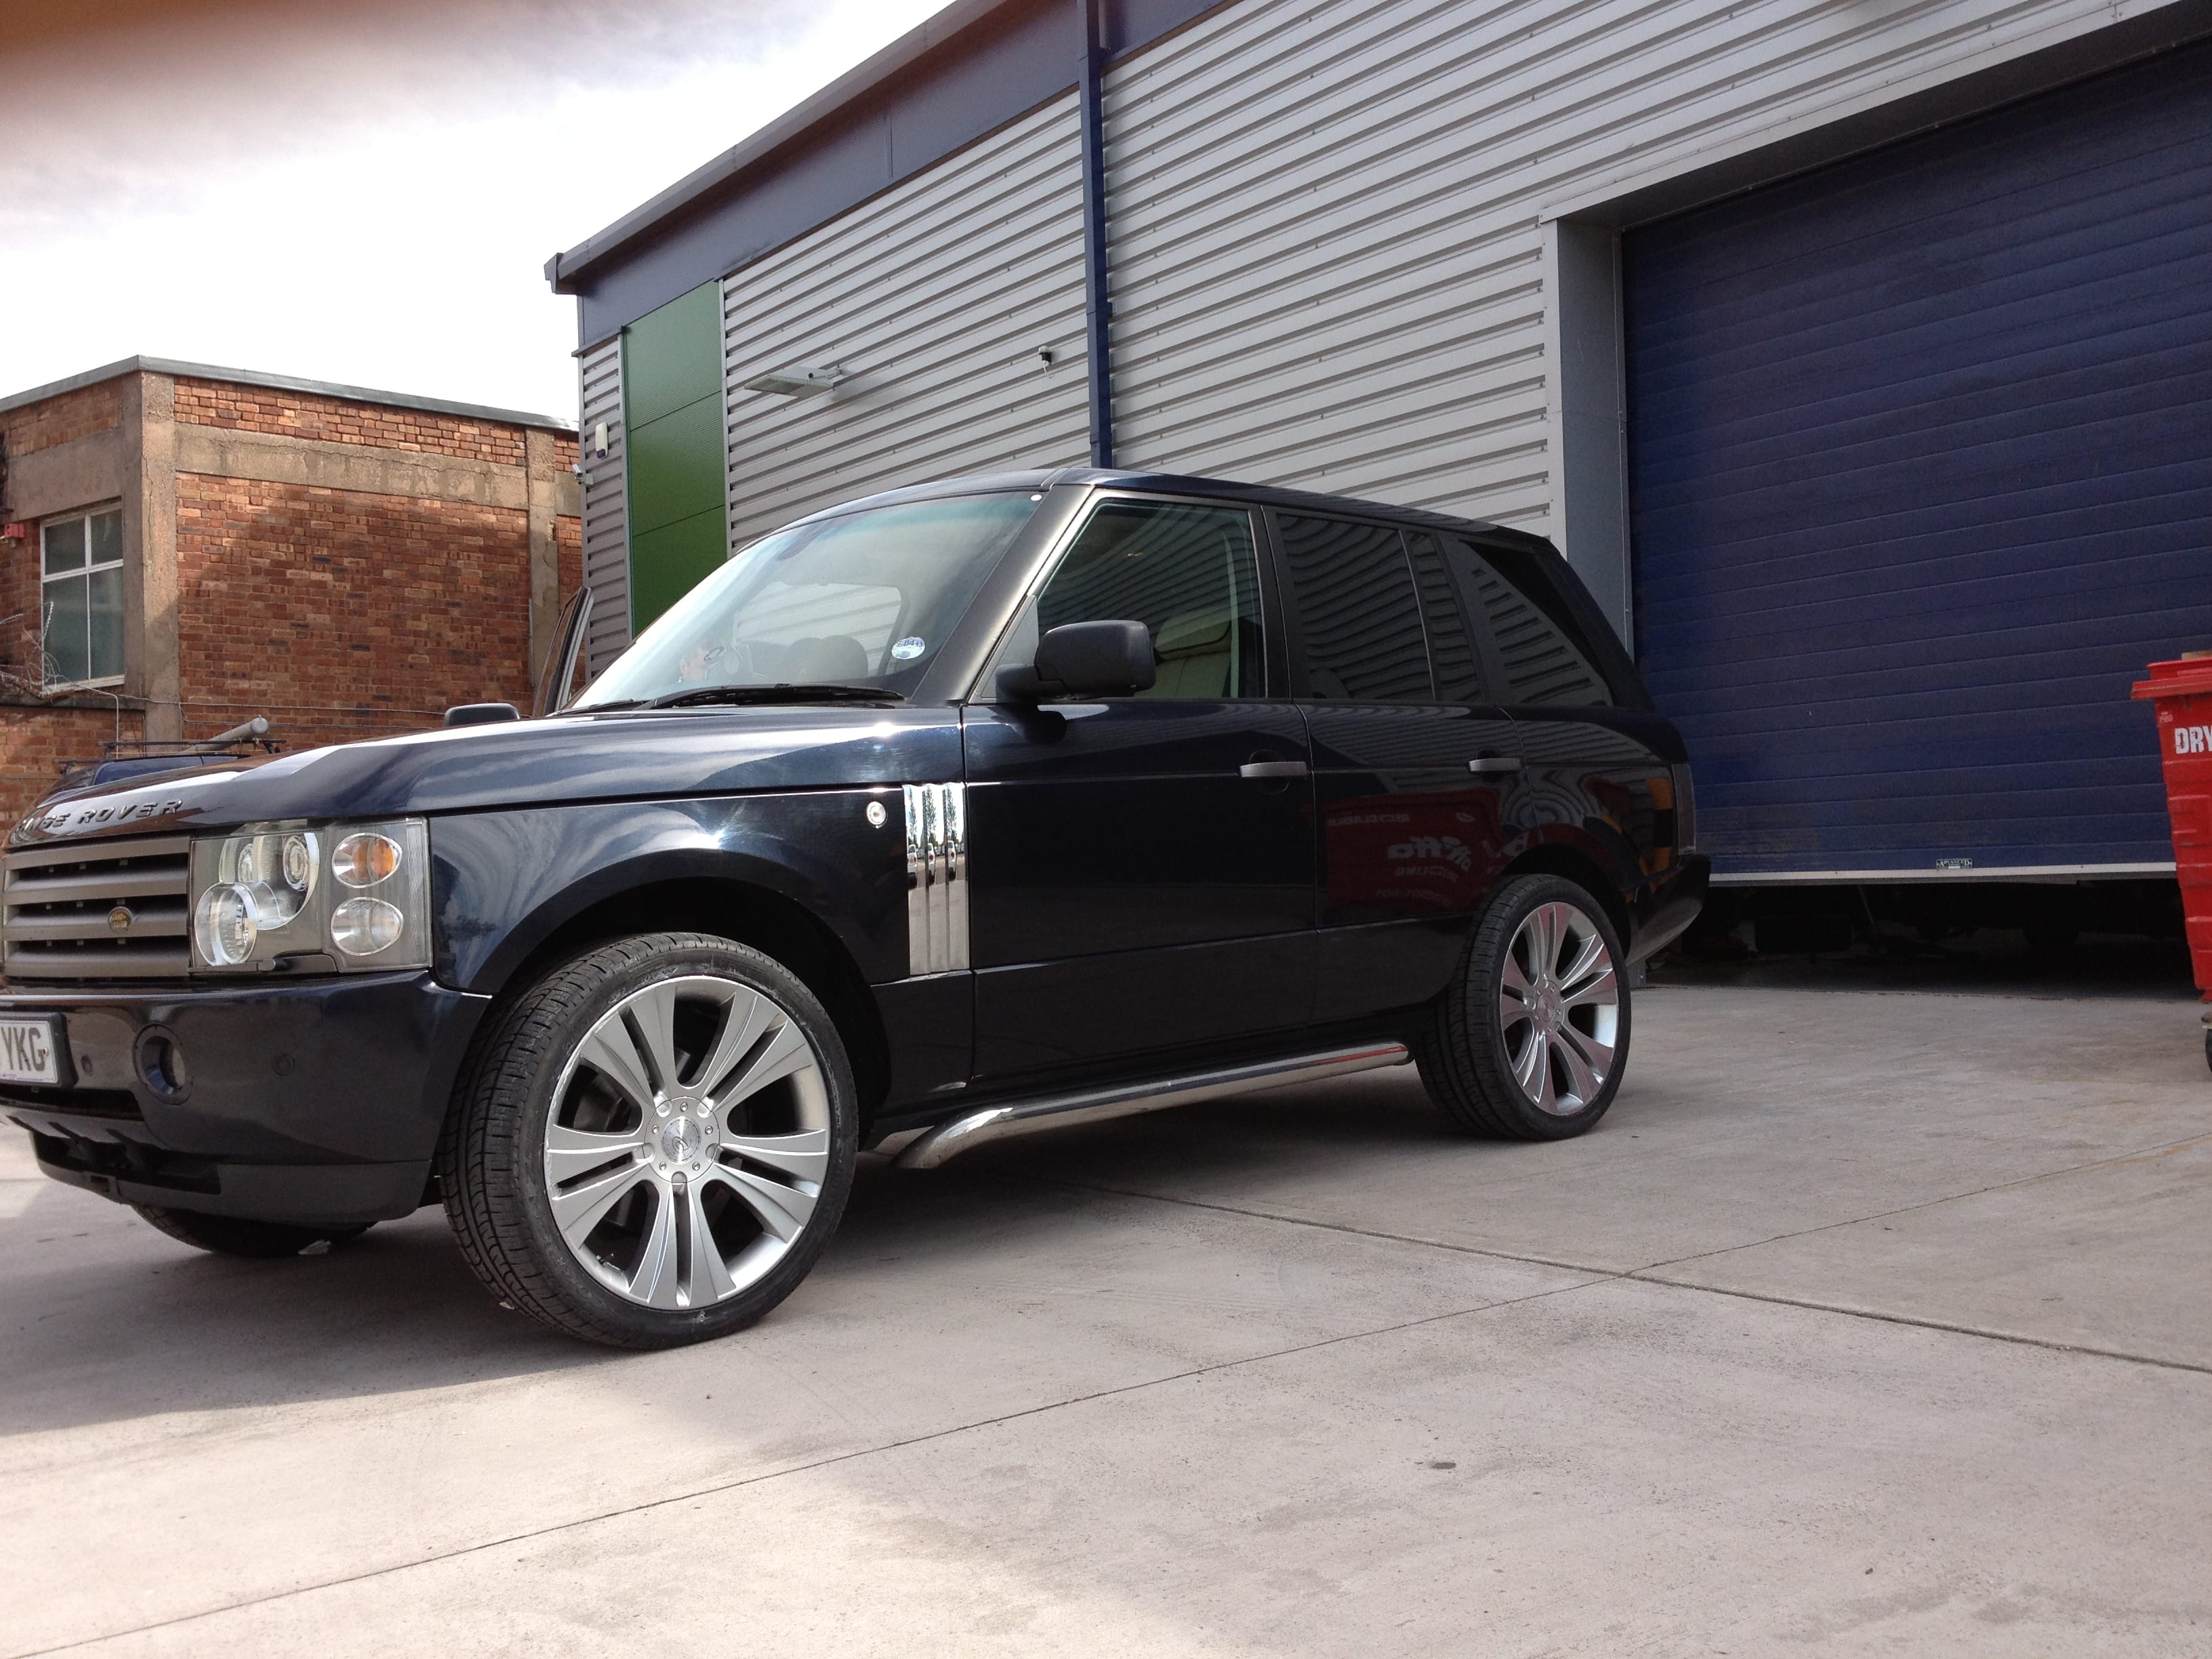 22" Vogue alloy wheels on this Range Rover L322